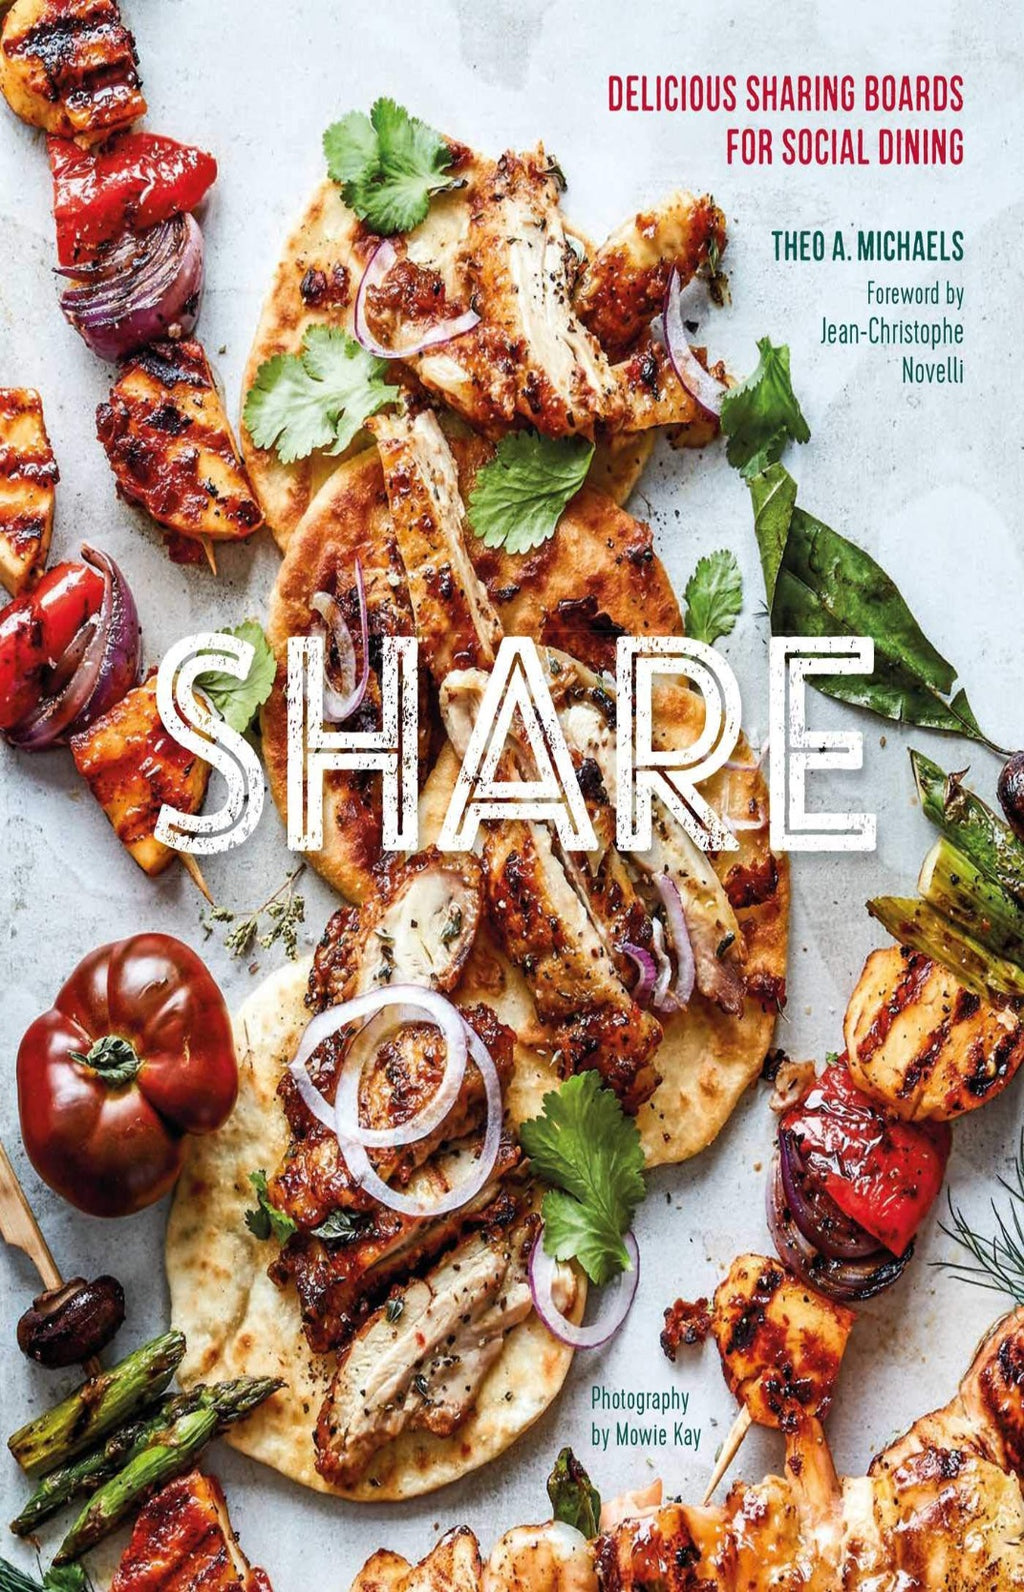 Share : Delicious Sharing Boards for Social Dining